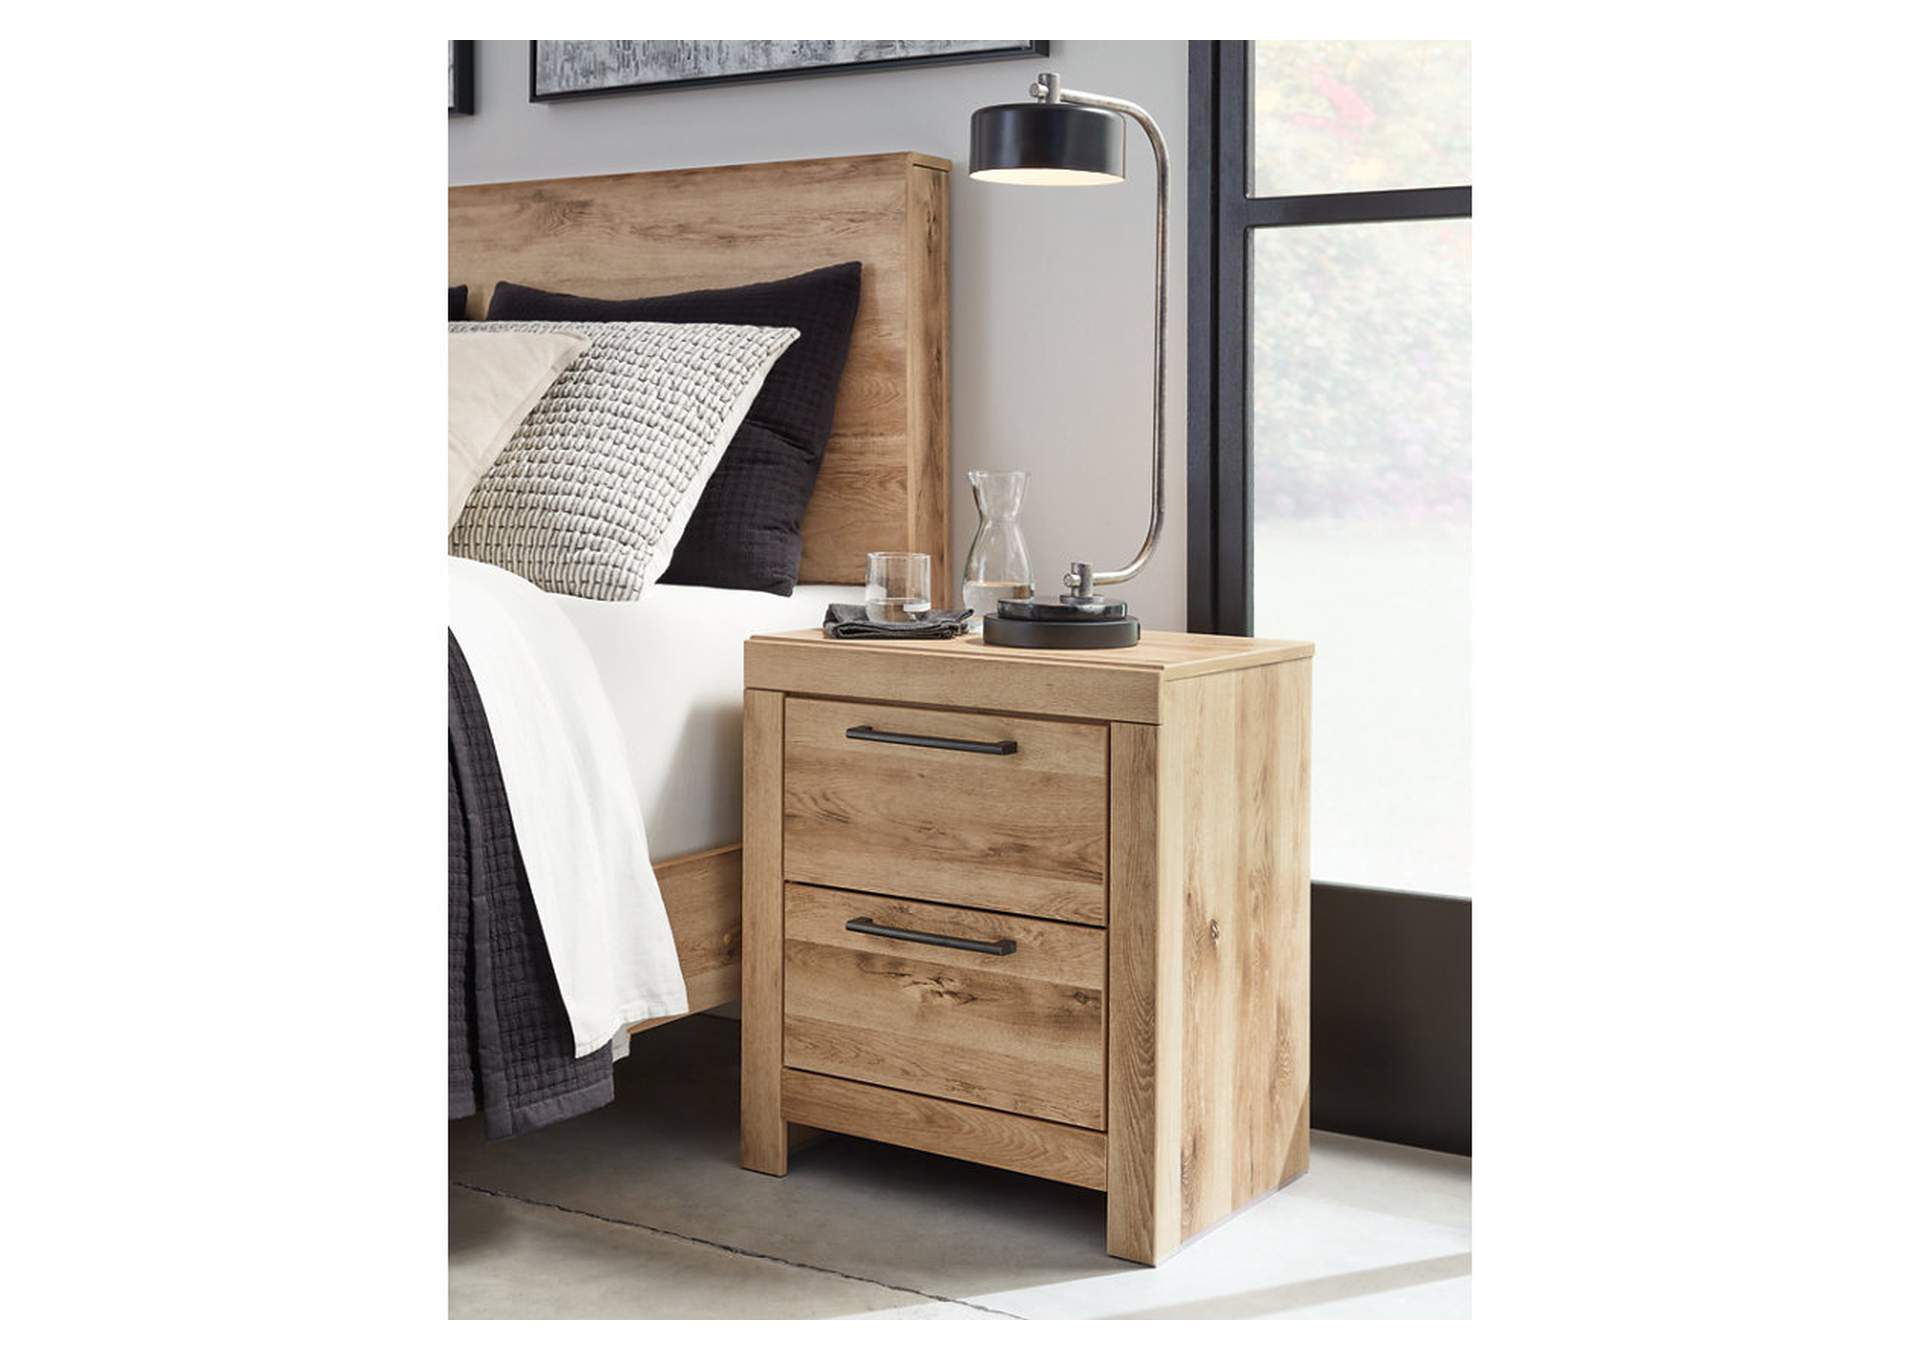 Hyanna Twin Panel Bed with Mirrored Dresser and 2 Nightstands,Signature Design By Ashley